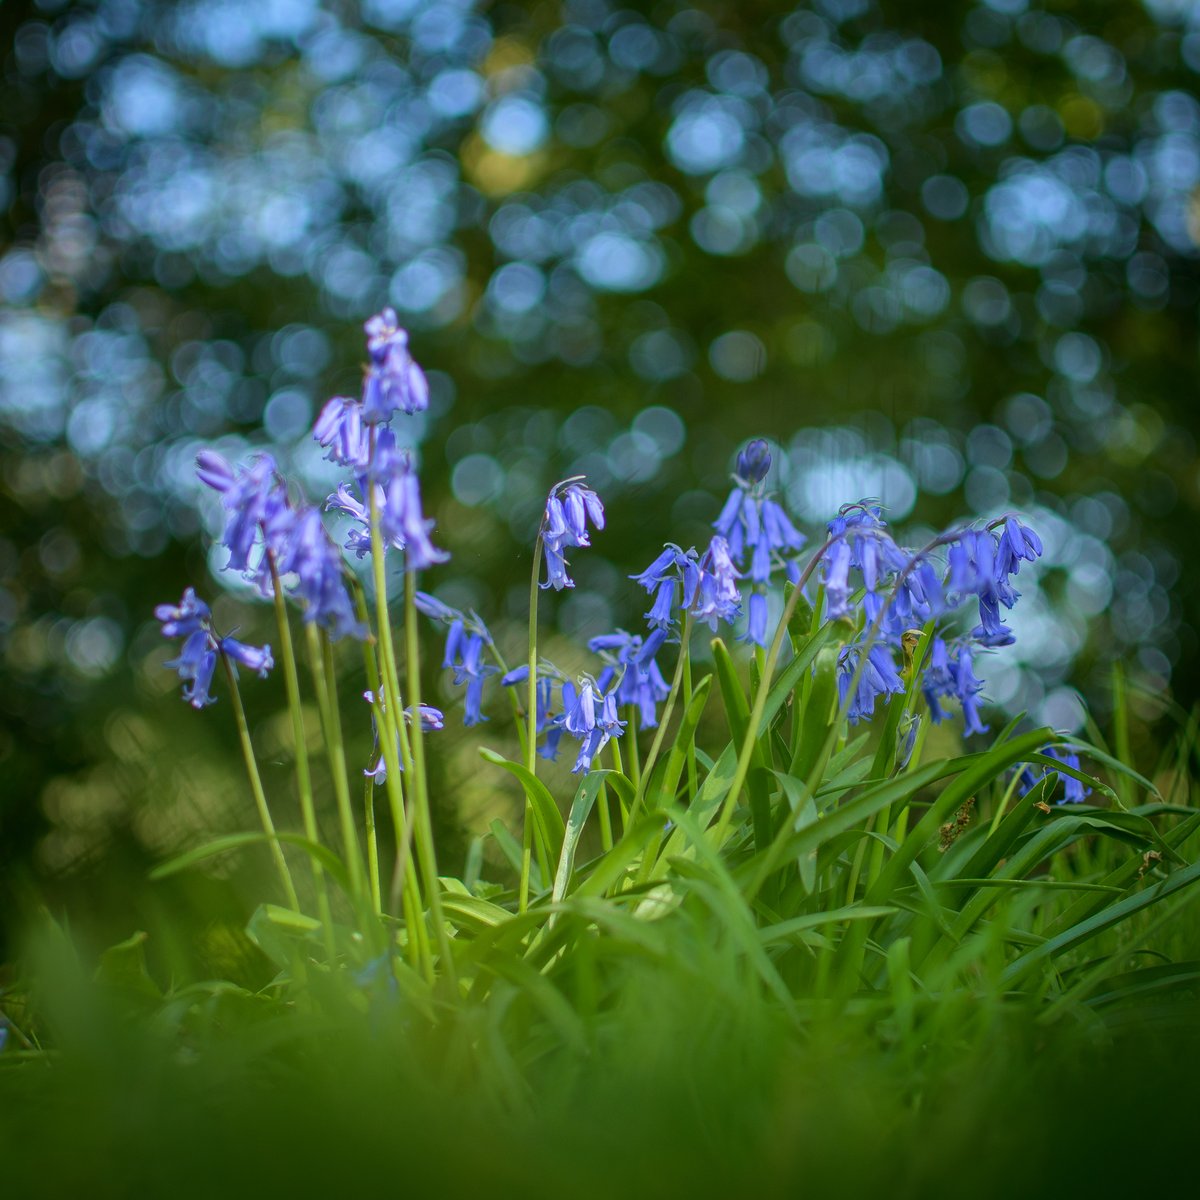 With some sunshine forecast for this week its the perfect chance to start spotting bluebells. 🌞 You'll find scatterings of beautiful bluebells across the estate at this time of year. #Attingham #AttinghamInBloom #Shropshire #bluebells 📷National Trust/Jane Scott